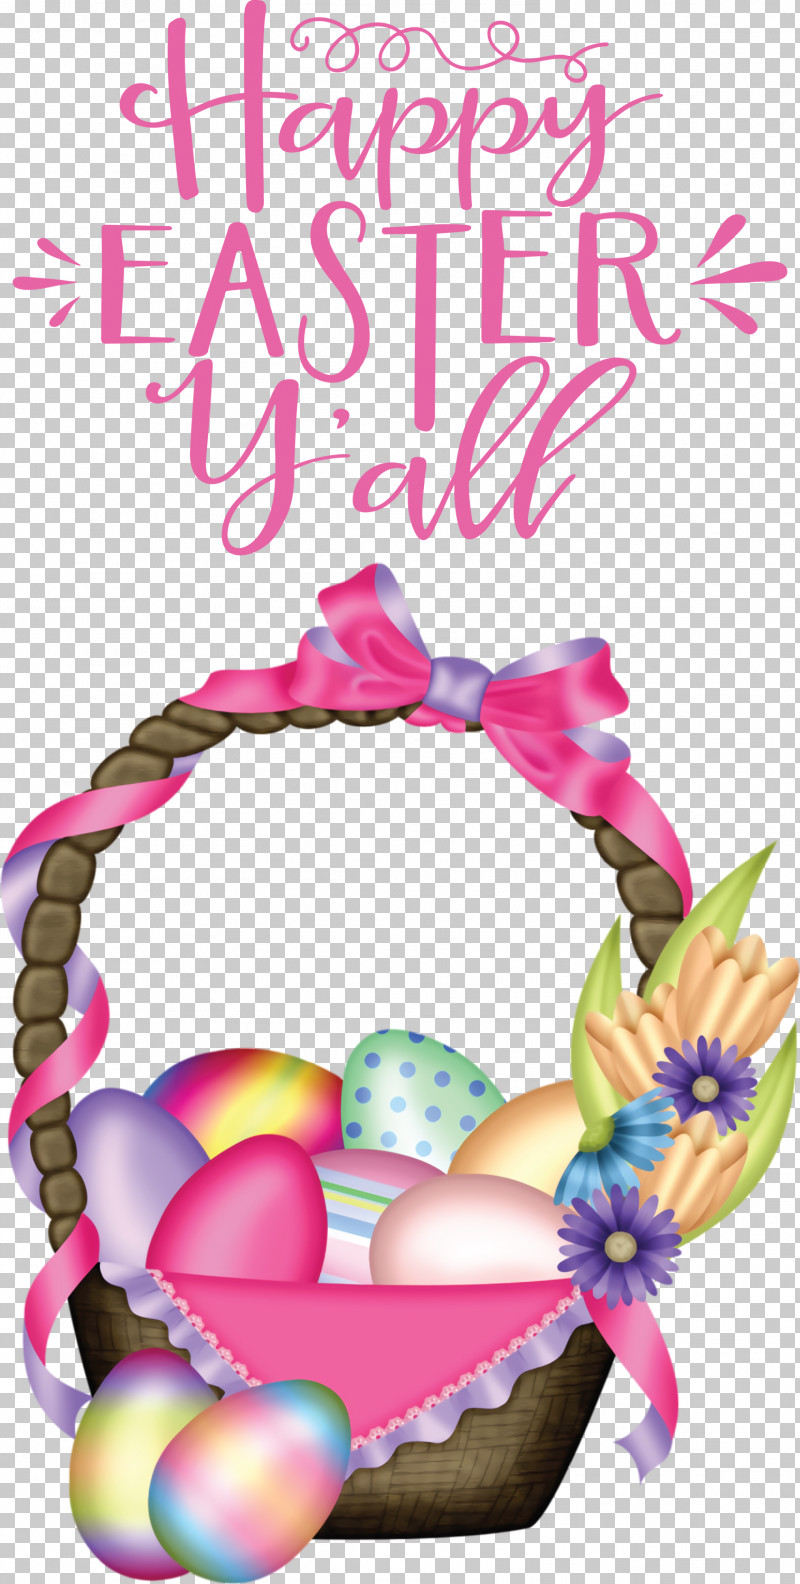 Happy Easter Easter Sunday Easter PNG, Clipart, Basket, Chocolate Bunny, Easter, Easter Basket, Easter Bunny Free PNG Download